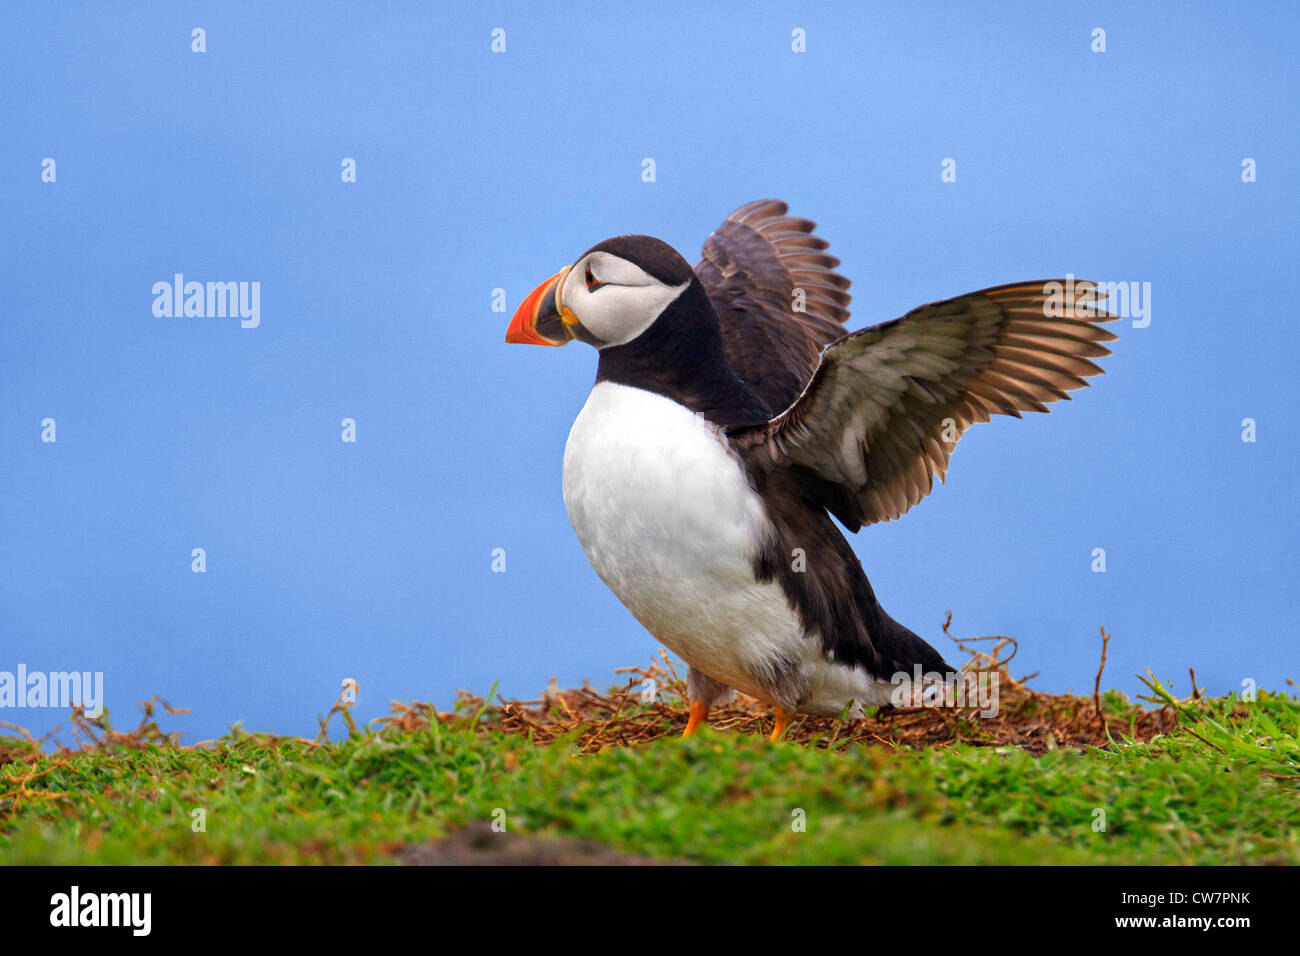 Puffin with wings stretched ready for flight Stock Photo